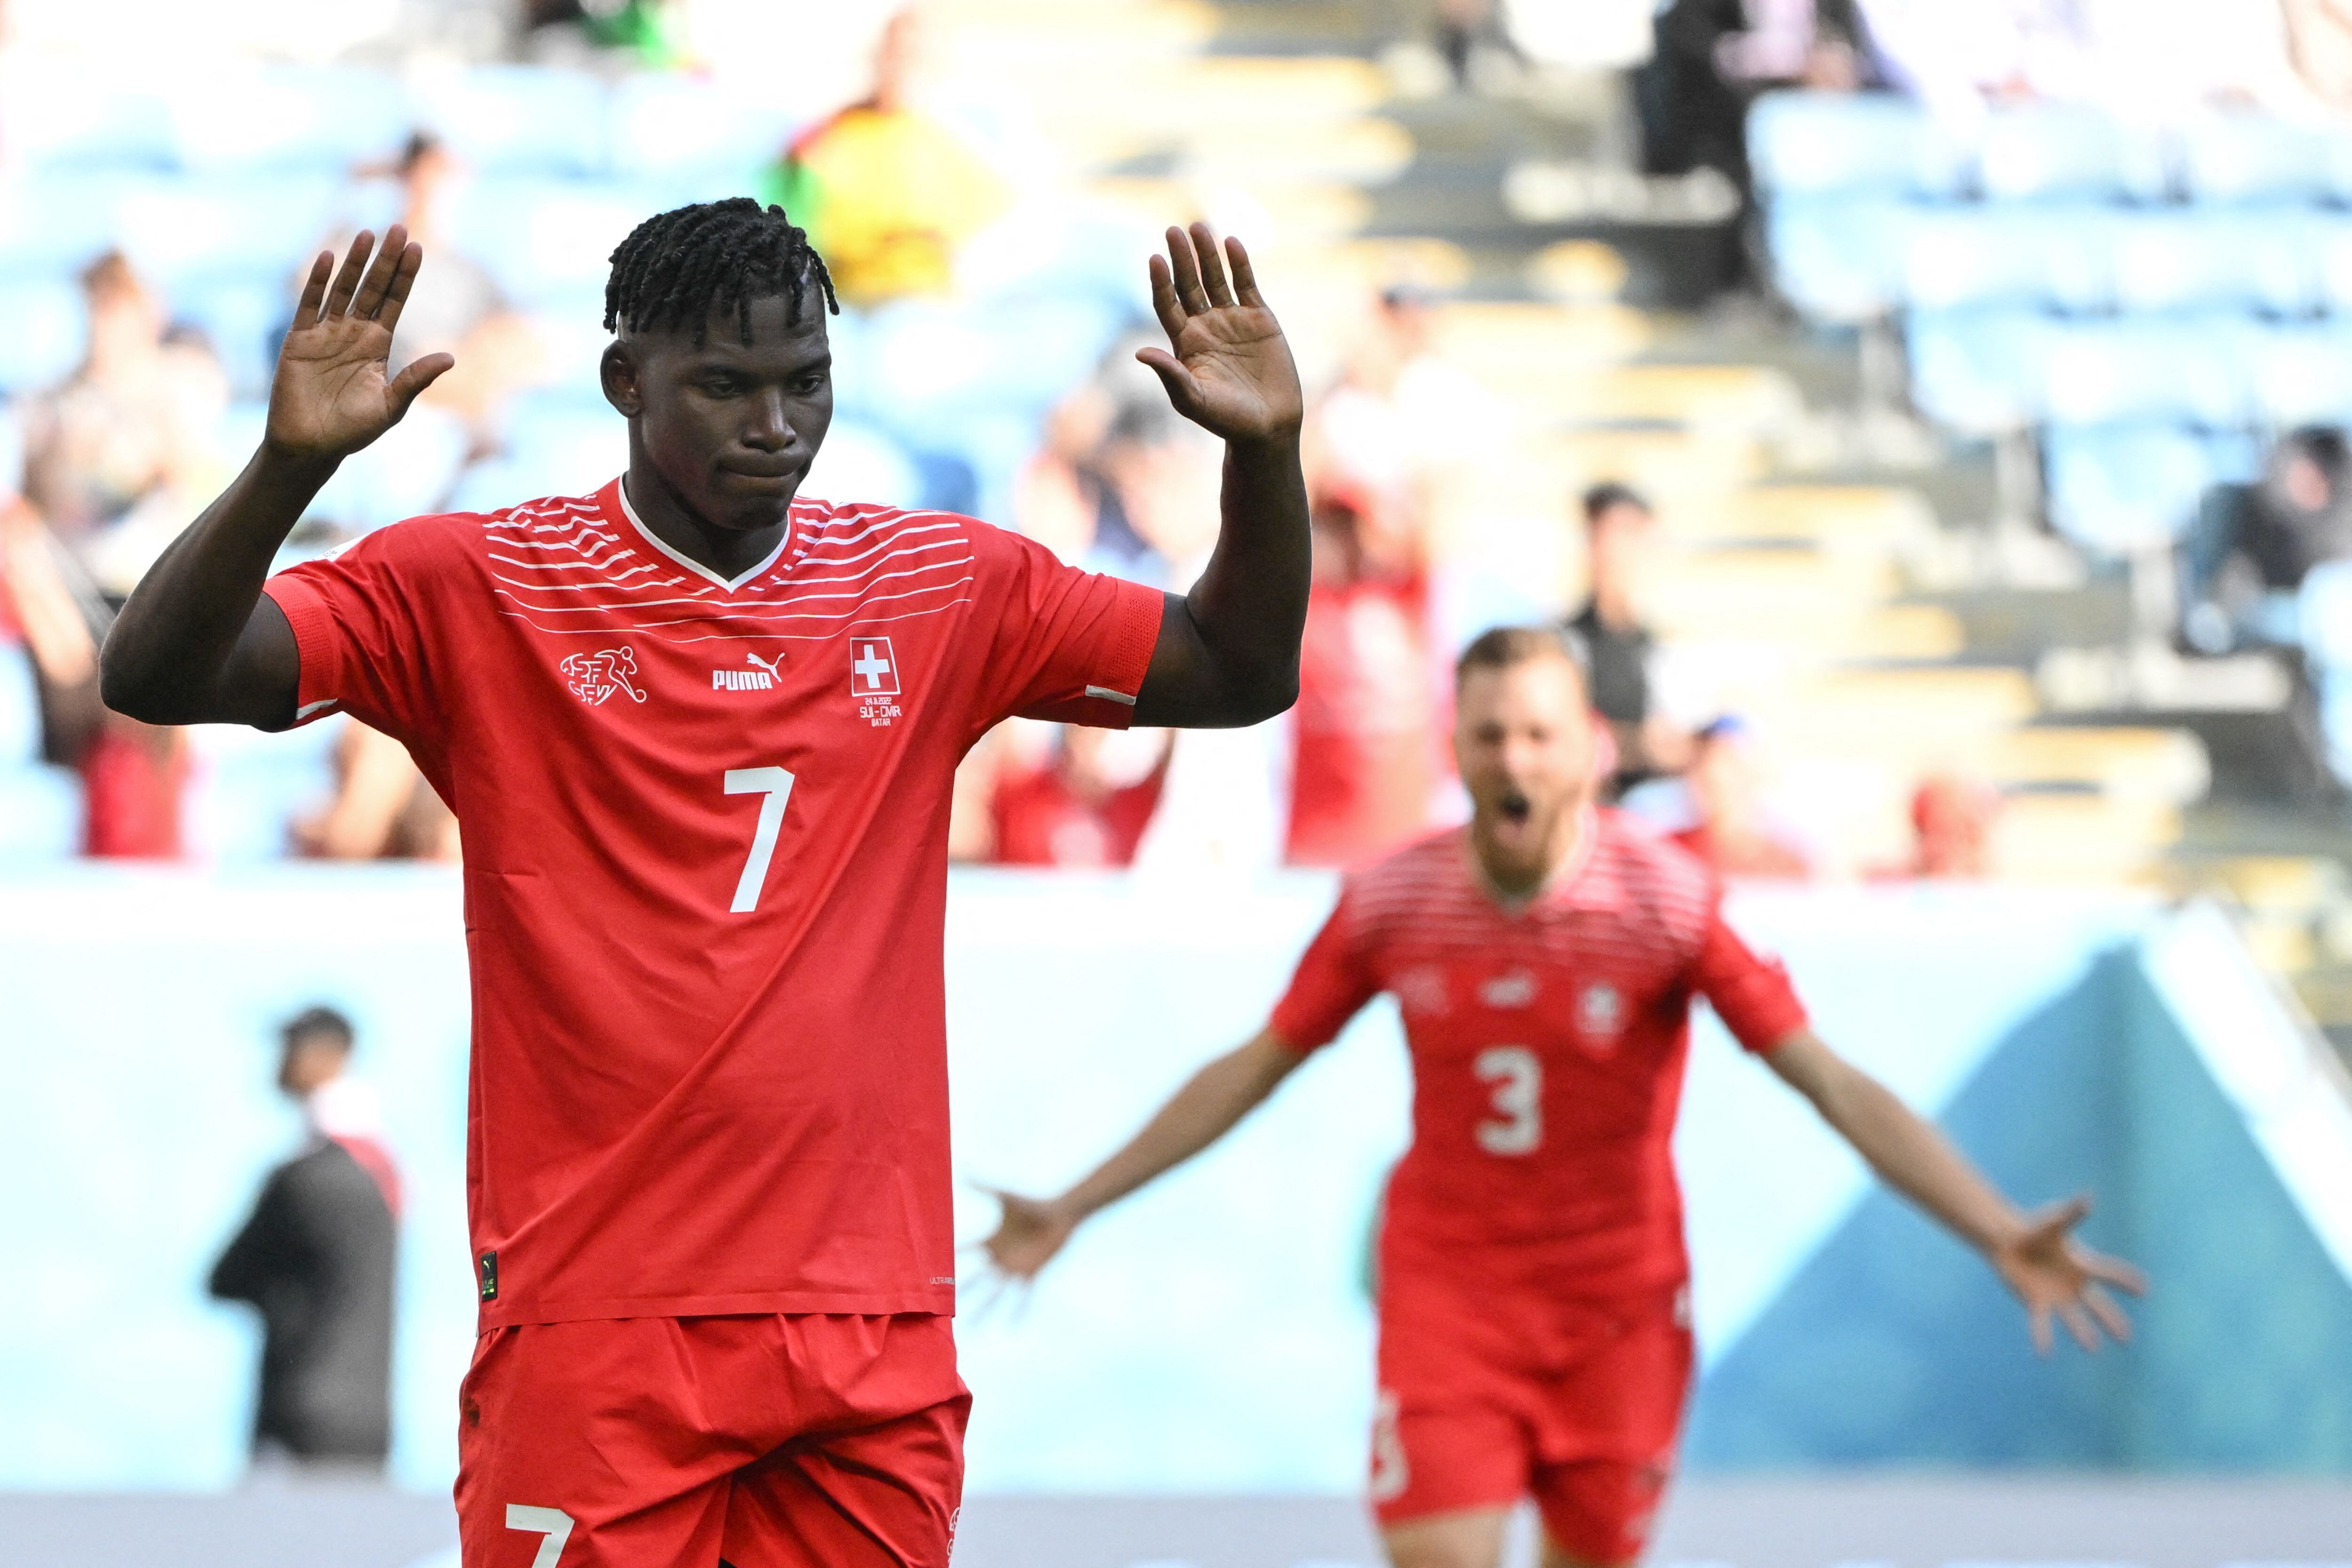 Switzerland's forward #07 Breel Embolo celebrates scoring his team's first goal during the Qatar 2022 World Cup Group G football match between Switzerland and Cameroon at the Al-Janoub Stadium in Al-Wakrah, south of Doha on November 24, 2022. (Photo by FABRICE COFFRINI / AFP)